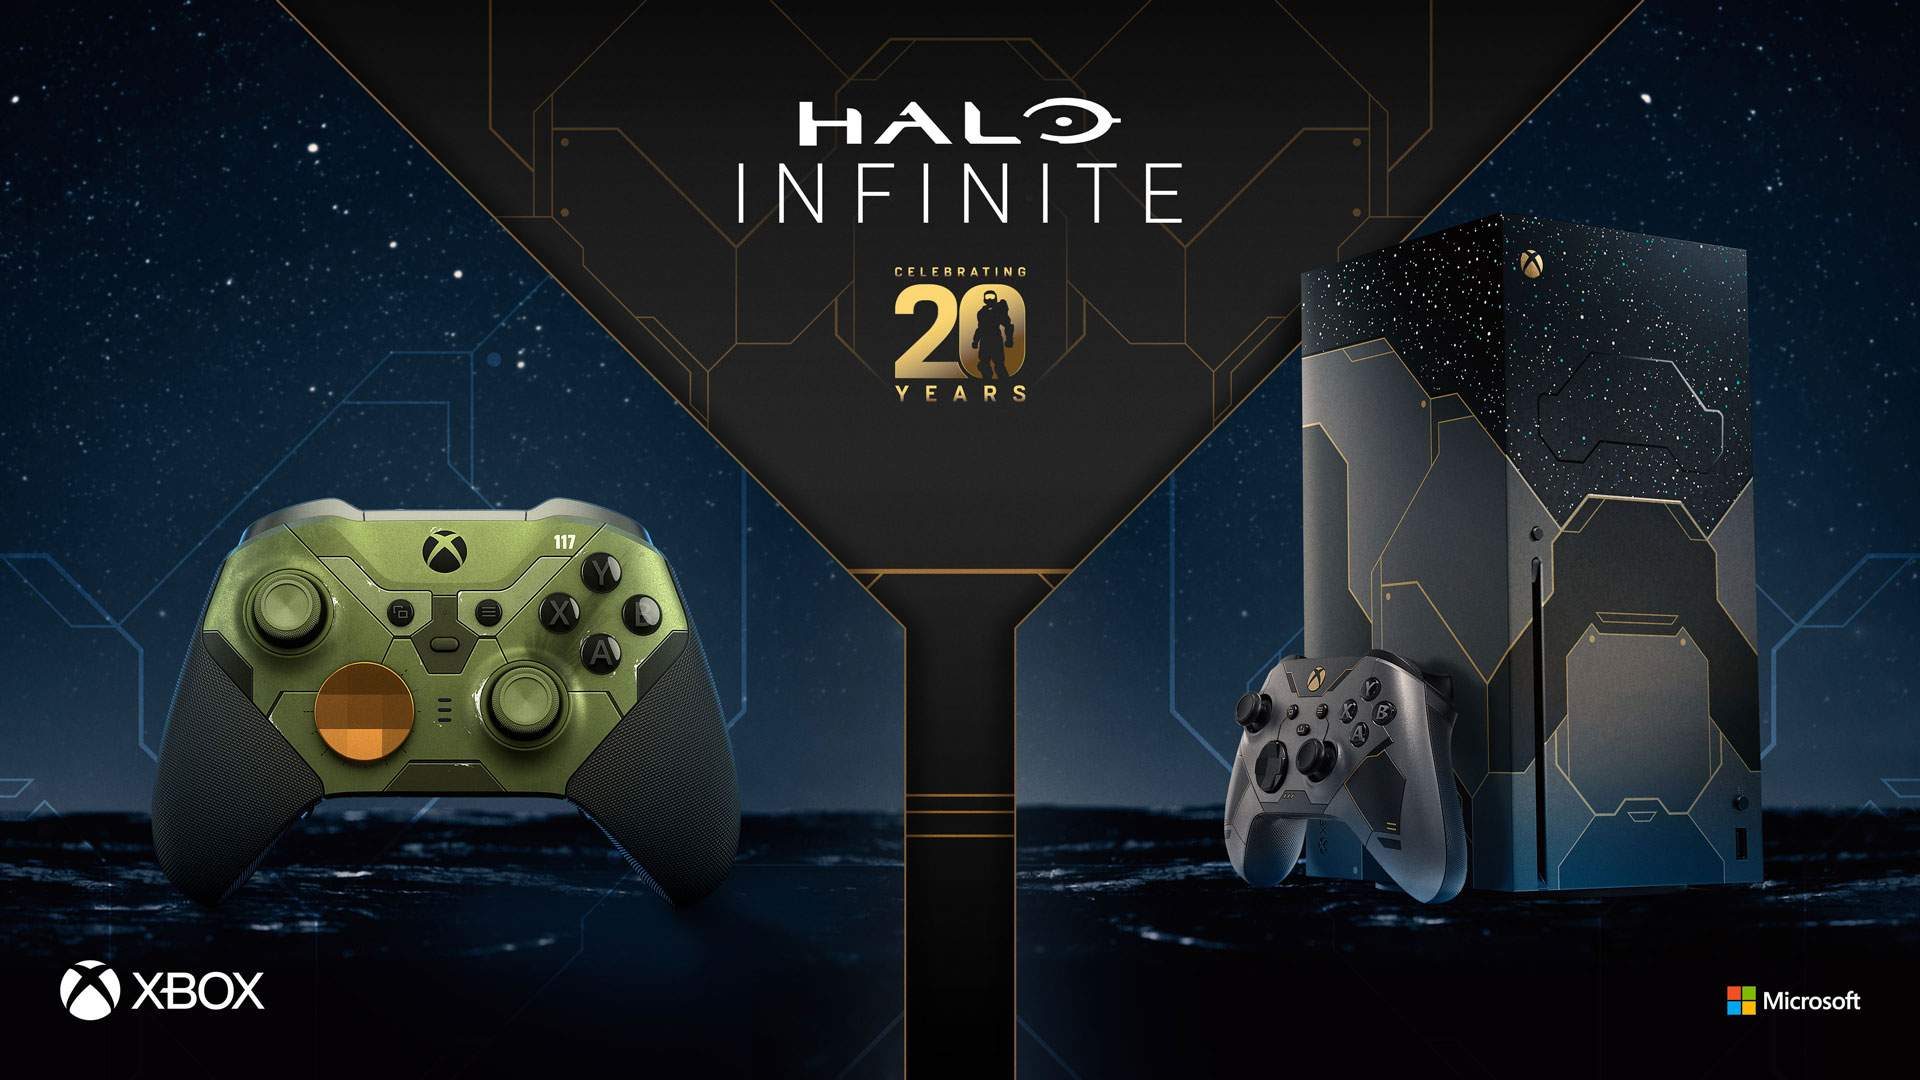 Halo Infinite limited edition console and controller